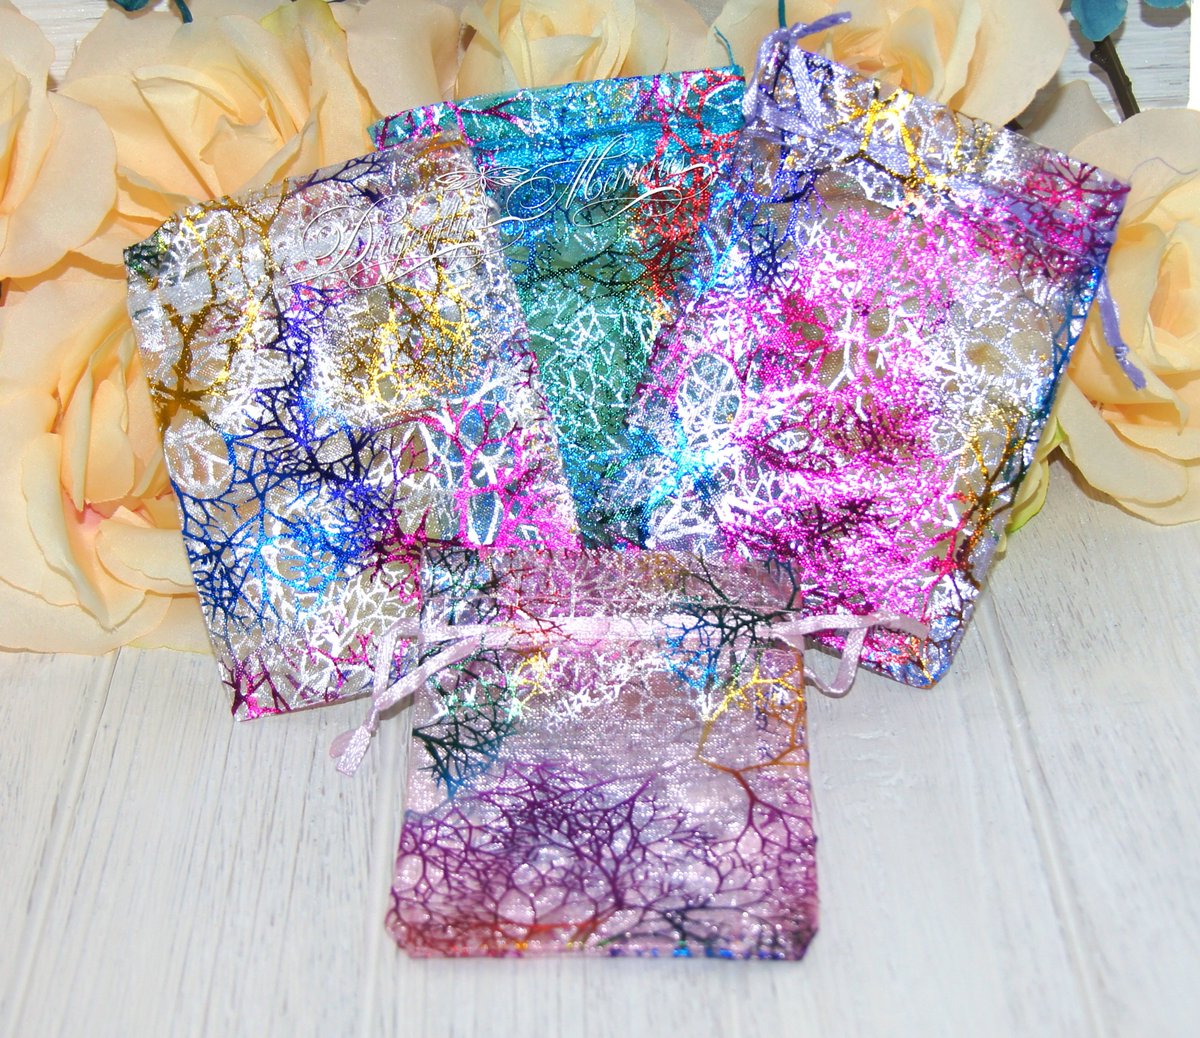 Excited to share the latest addition to my #etsy shop: Metallic Rainbow Tree Organza Sheer Drawstring Jewelry Gift Pouch  etsy.me/2FLM0Go #weddings #rainbow #bridalshower #blingglam #partyfavorbag #treatbag #giftbag #drawstringbag #etsywedding #etsyfind #bag